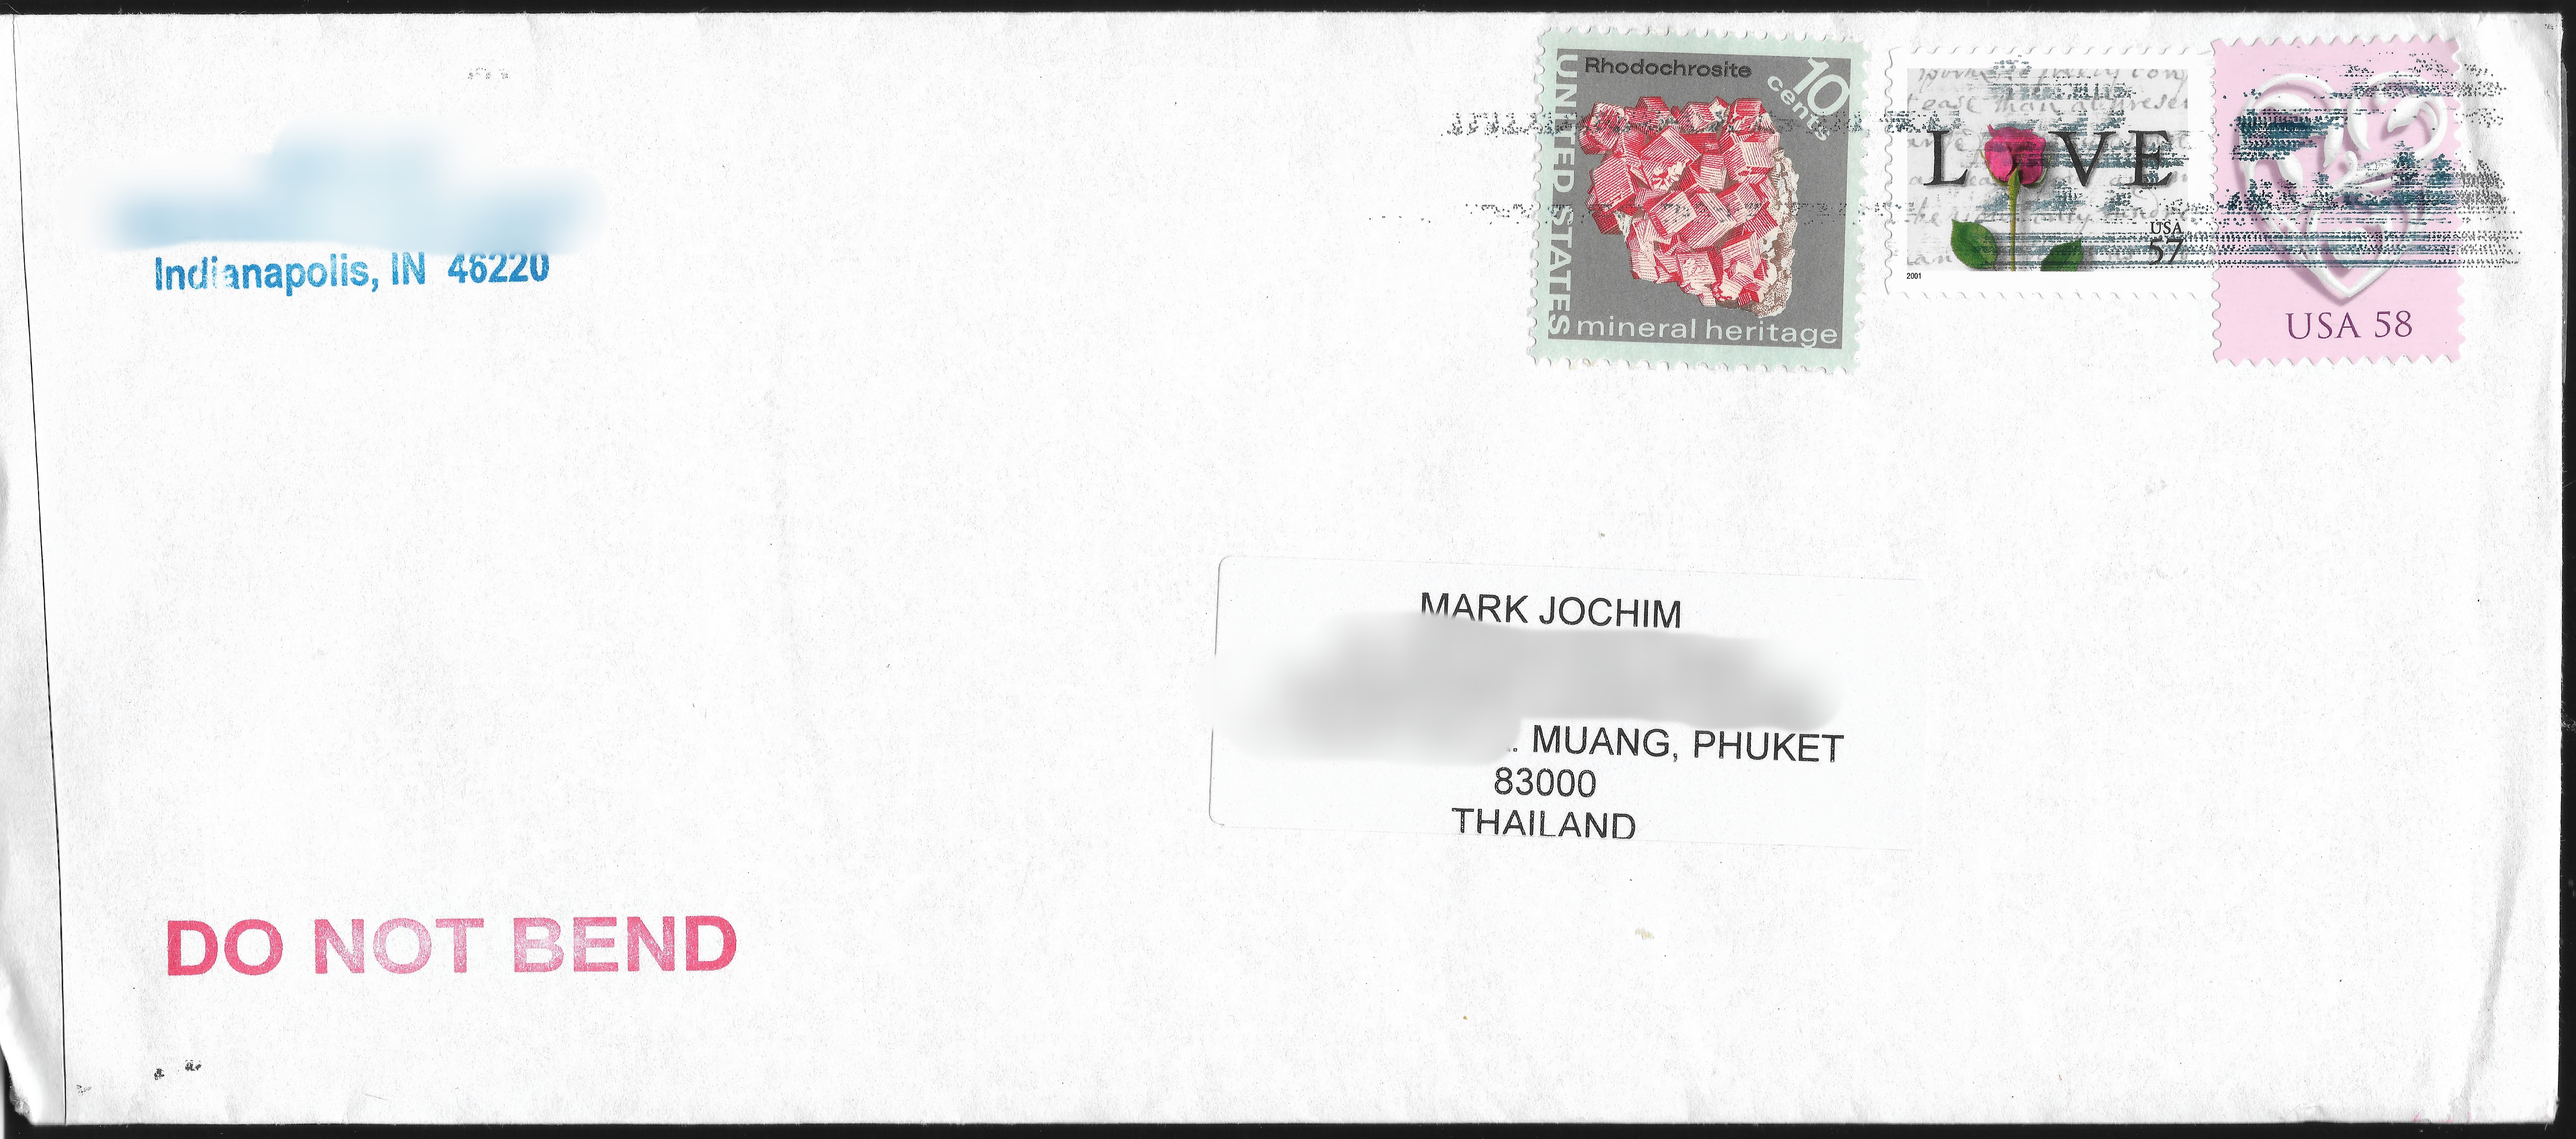 eBay order [US FDC] from Indianapolis, Indiana, USA. Received on January 5, 2019.